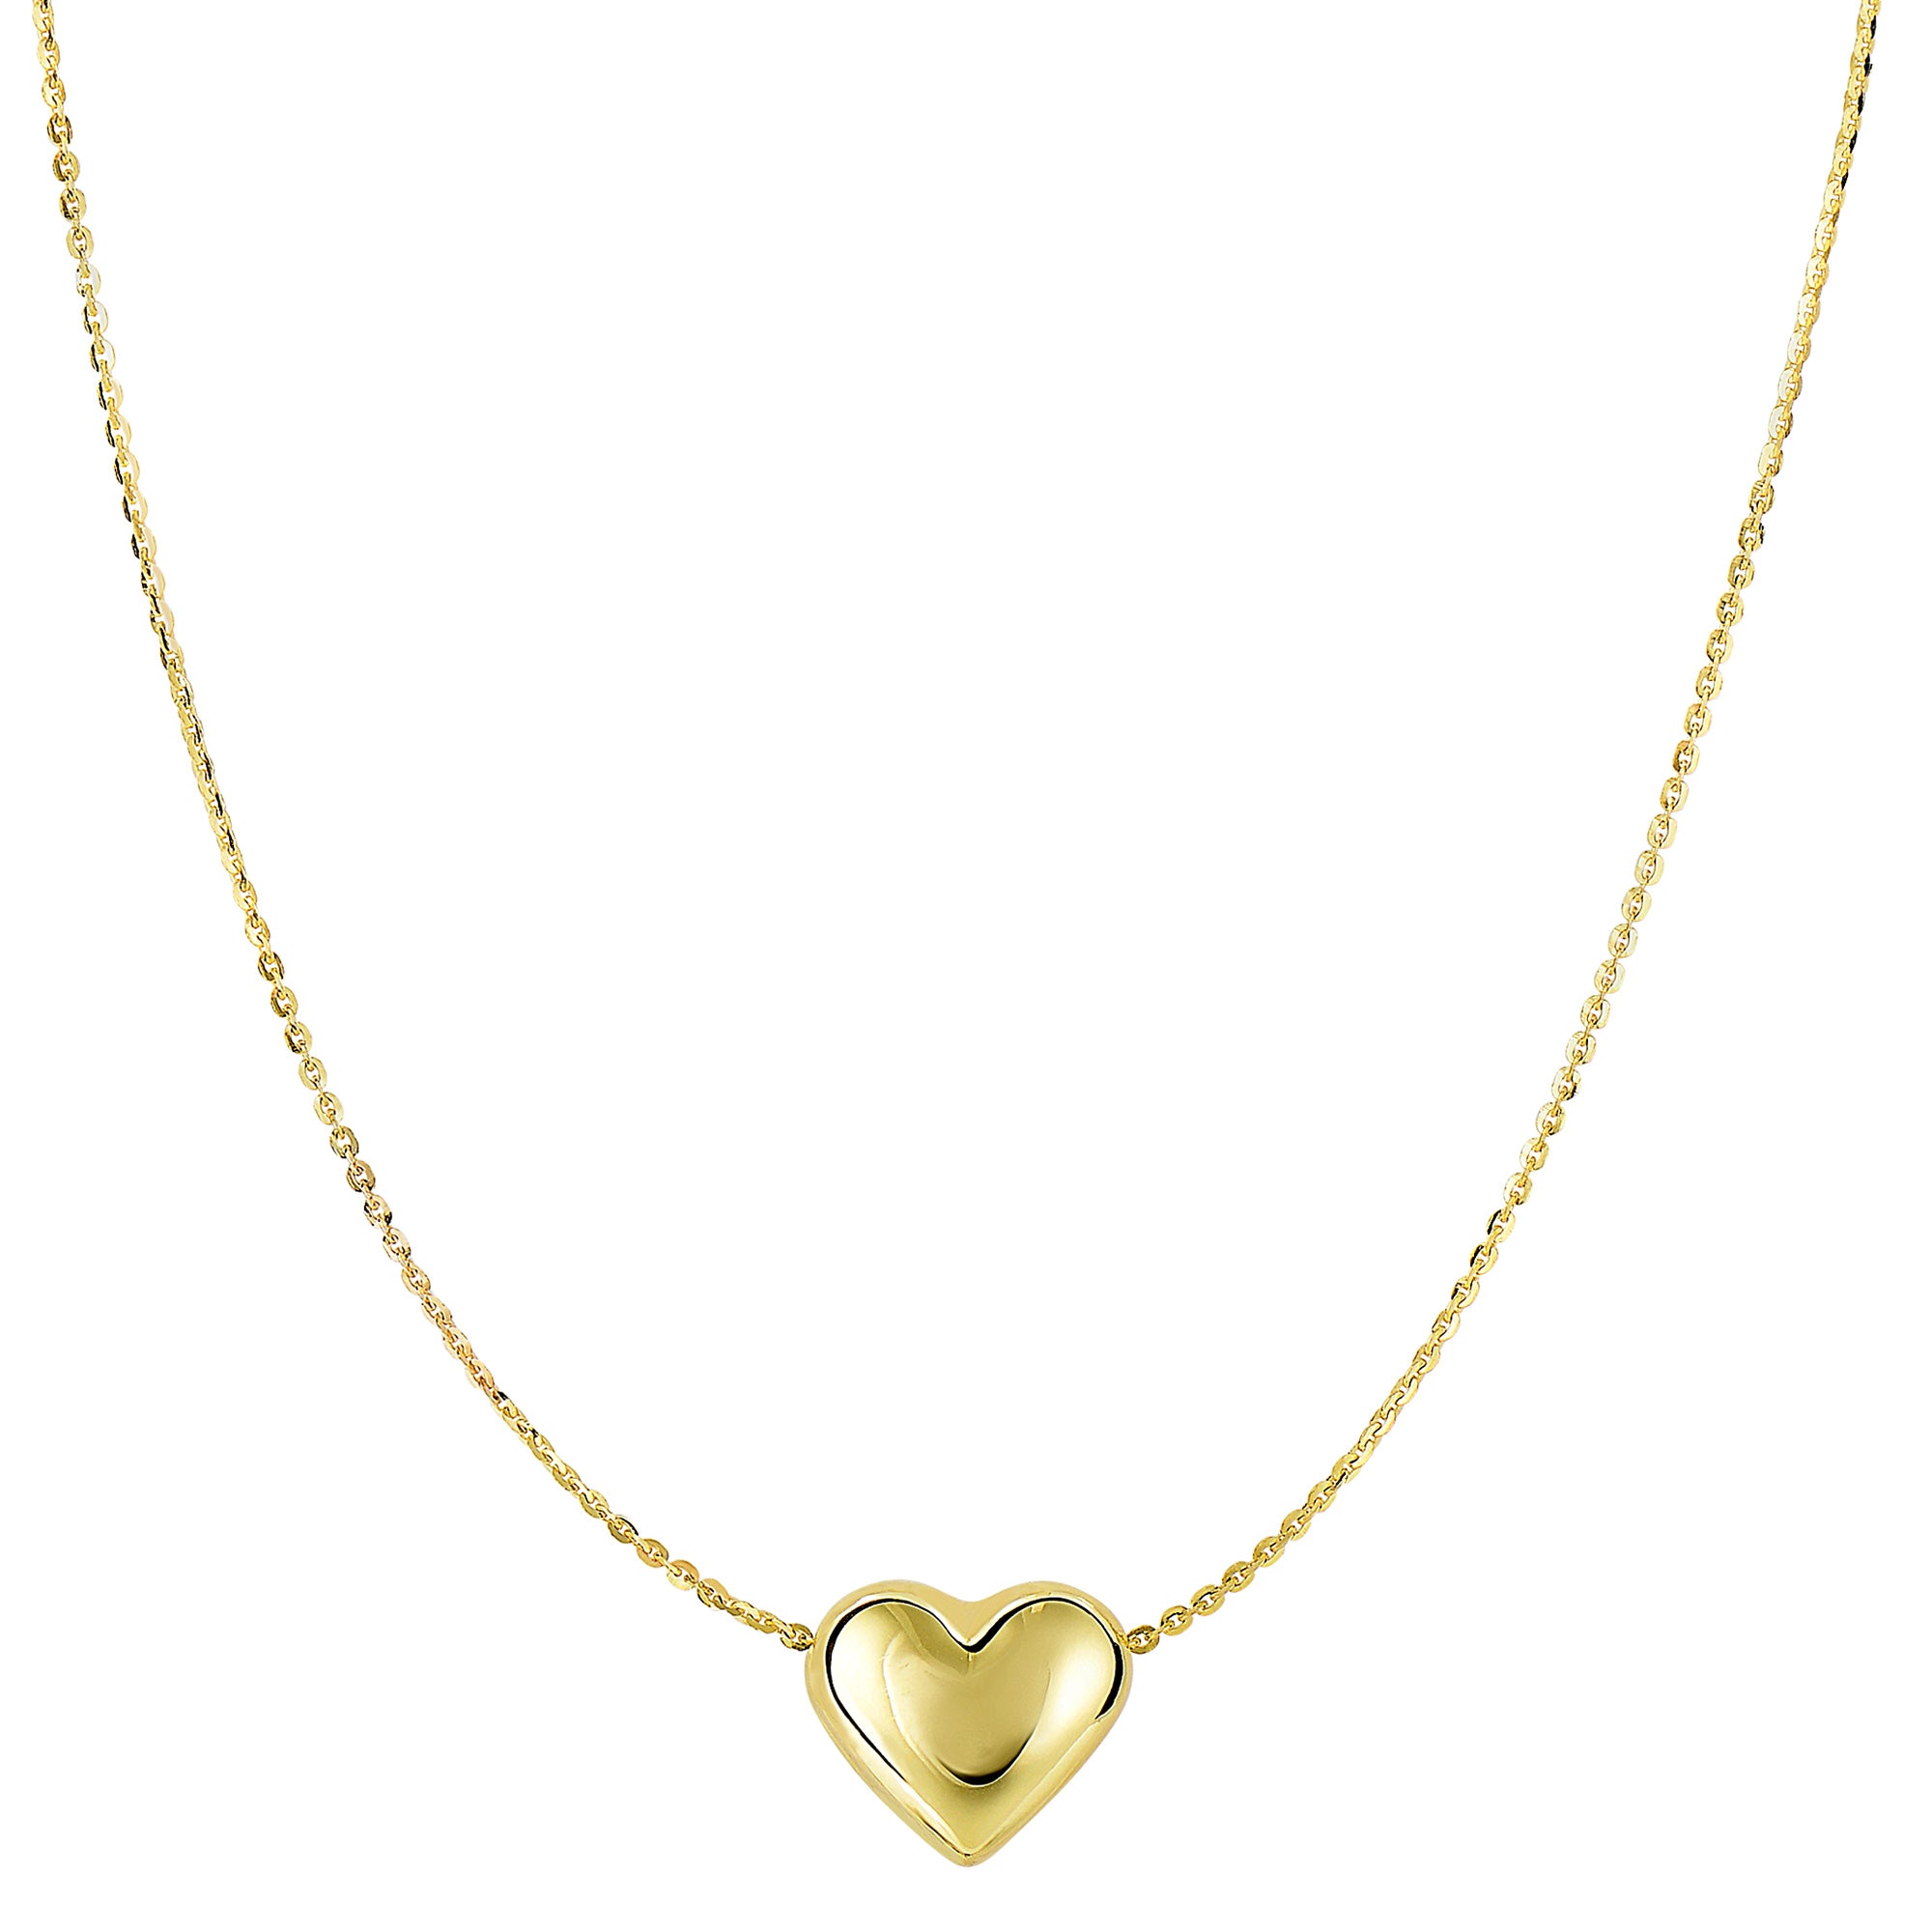 Real Gold Puffed Heart Pendant Necklace, 18"